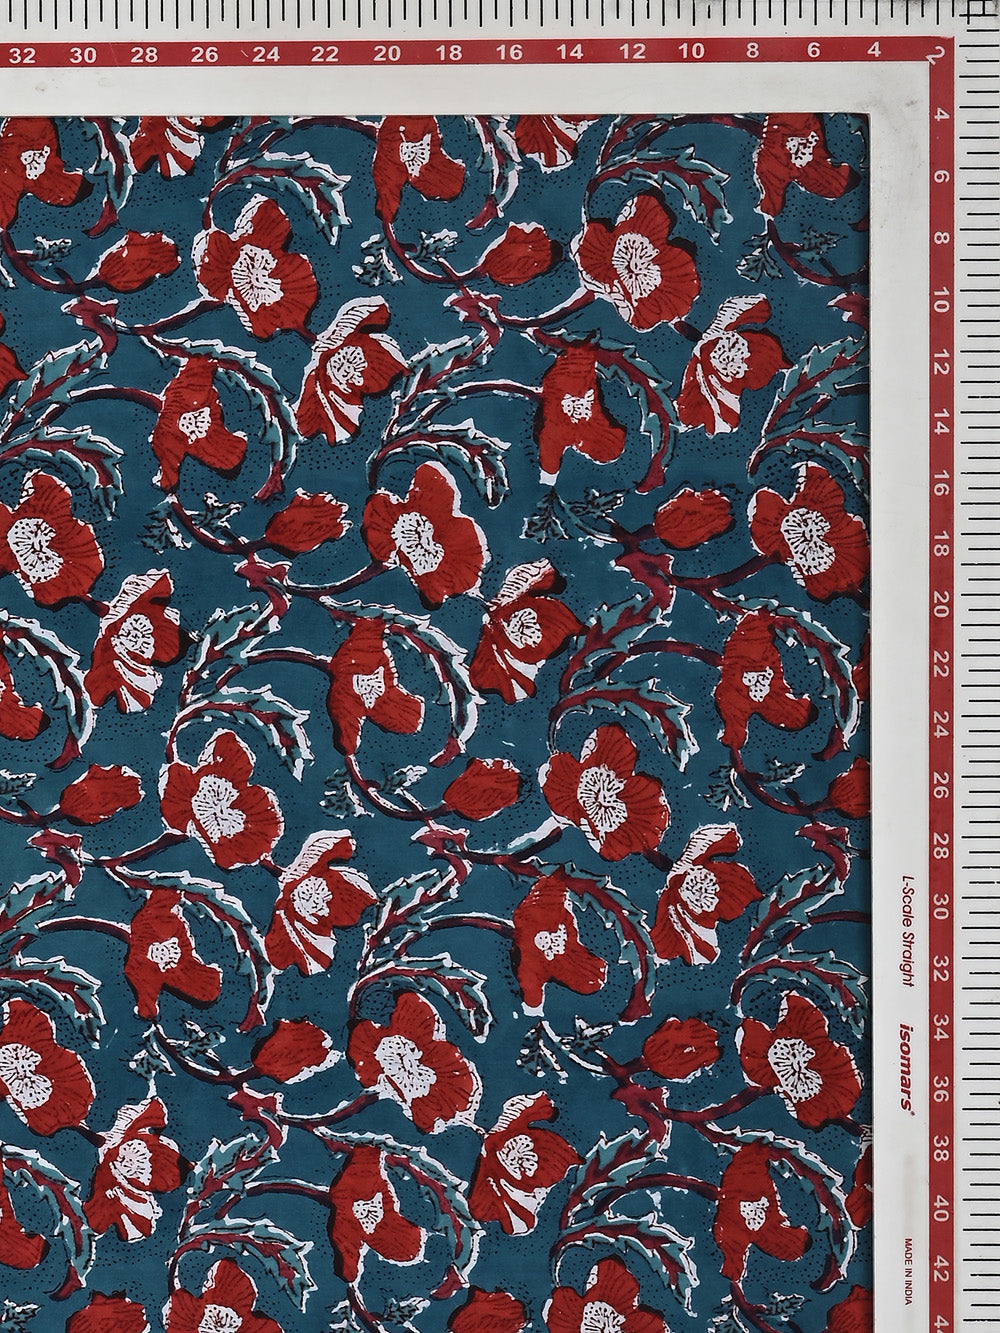 Red Poppy Jaal Pattern on Teal Blue Cotton Cambric Sanganeri Hand Block Printed Fabric